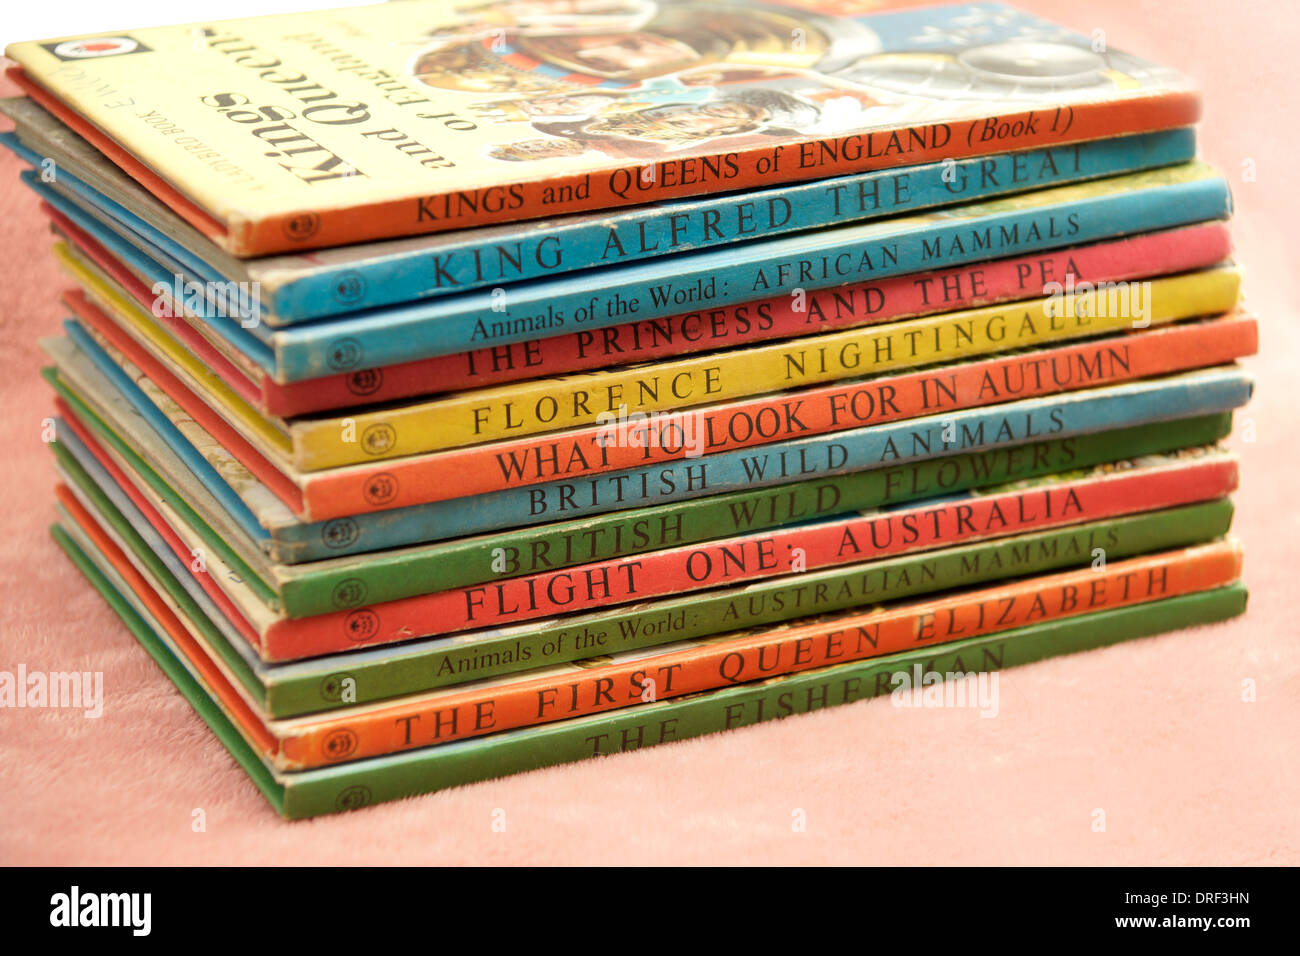 Selection of well read Ladybird books dating back to the 1950's & 1960's now celebrating their 60th anniversary Stock Photo